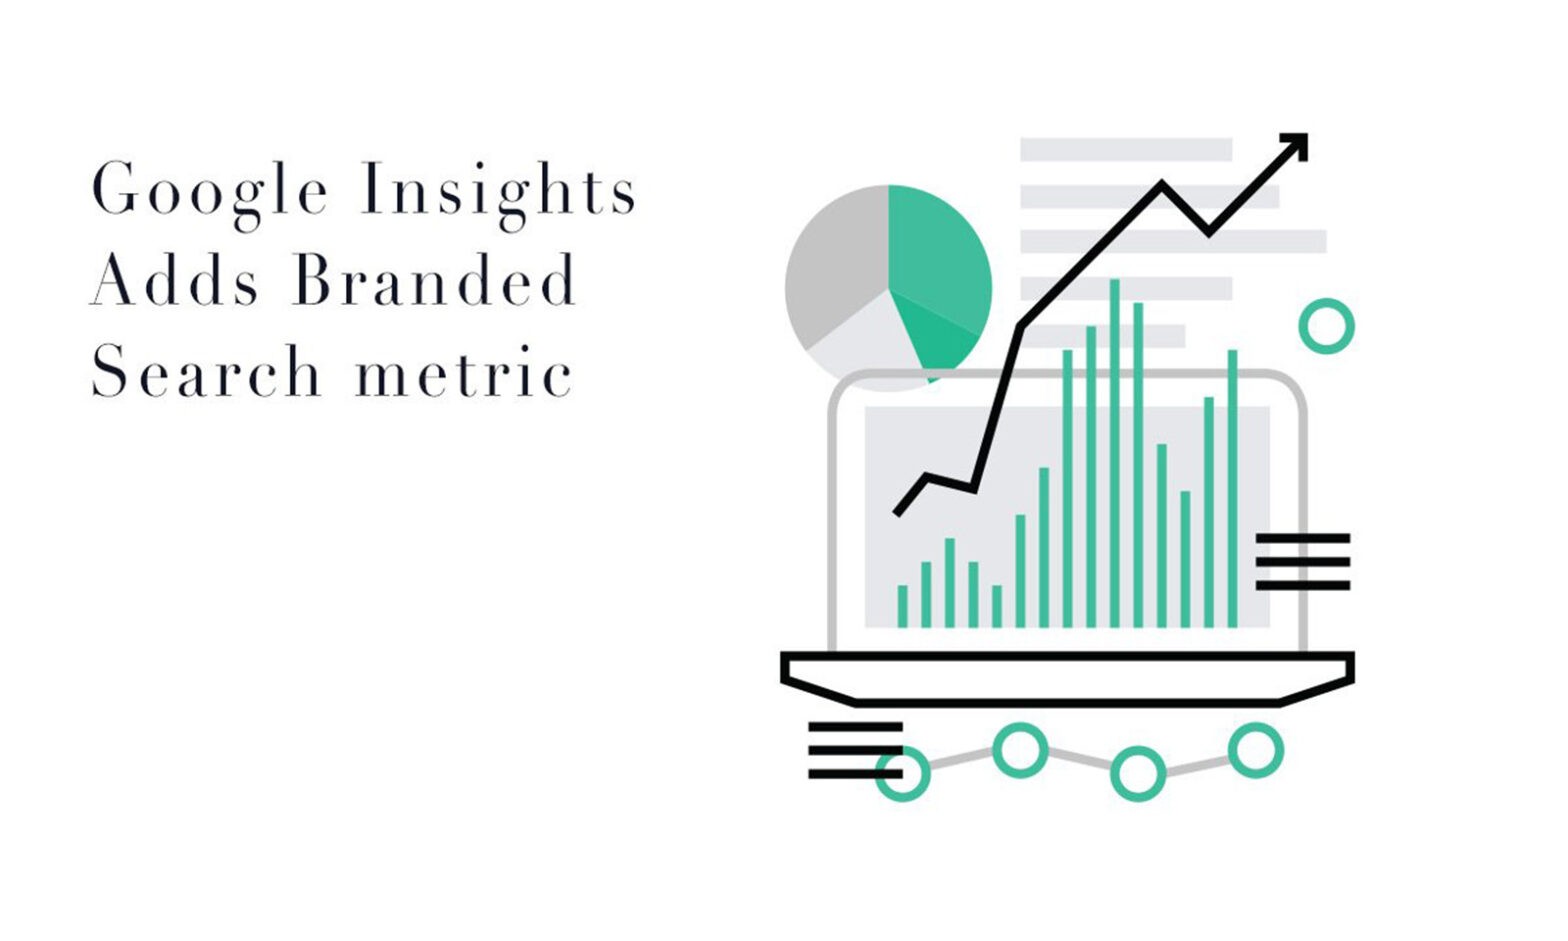 Featured image for post: Google Insights Adds Branded Search Metric